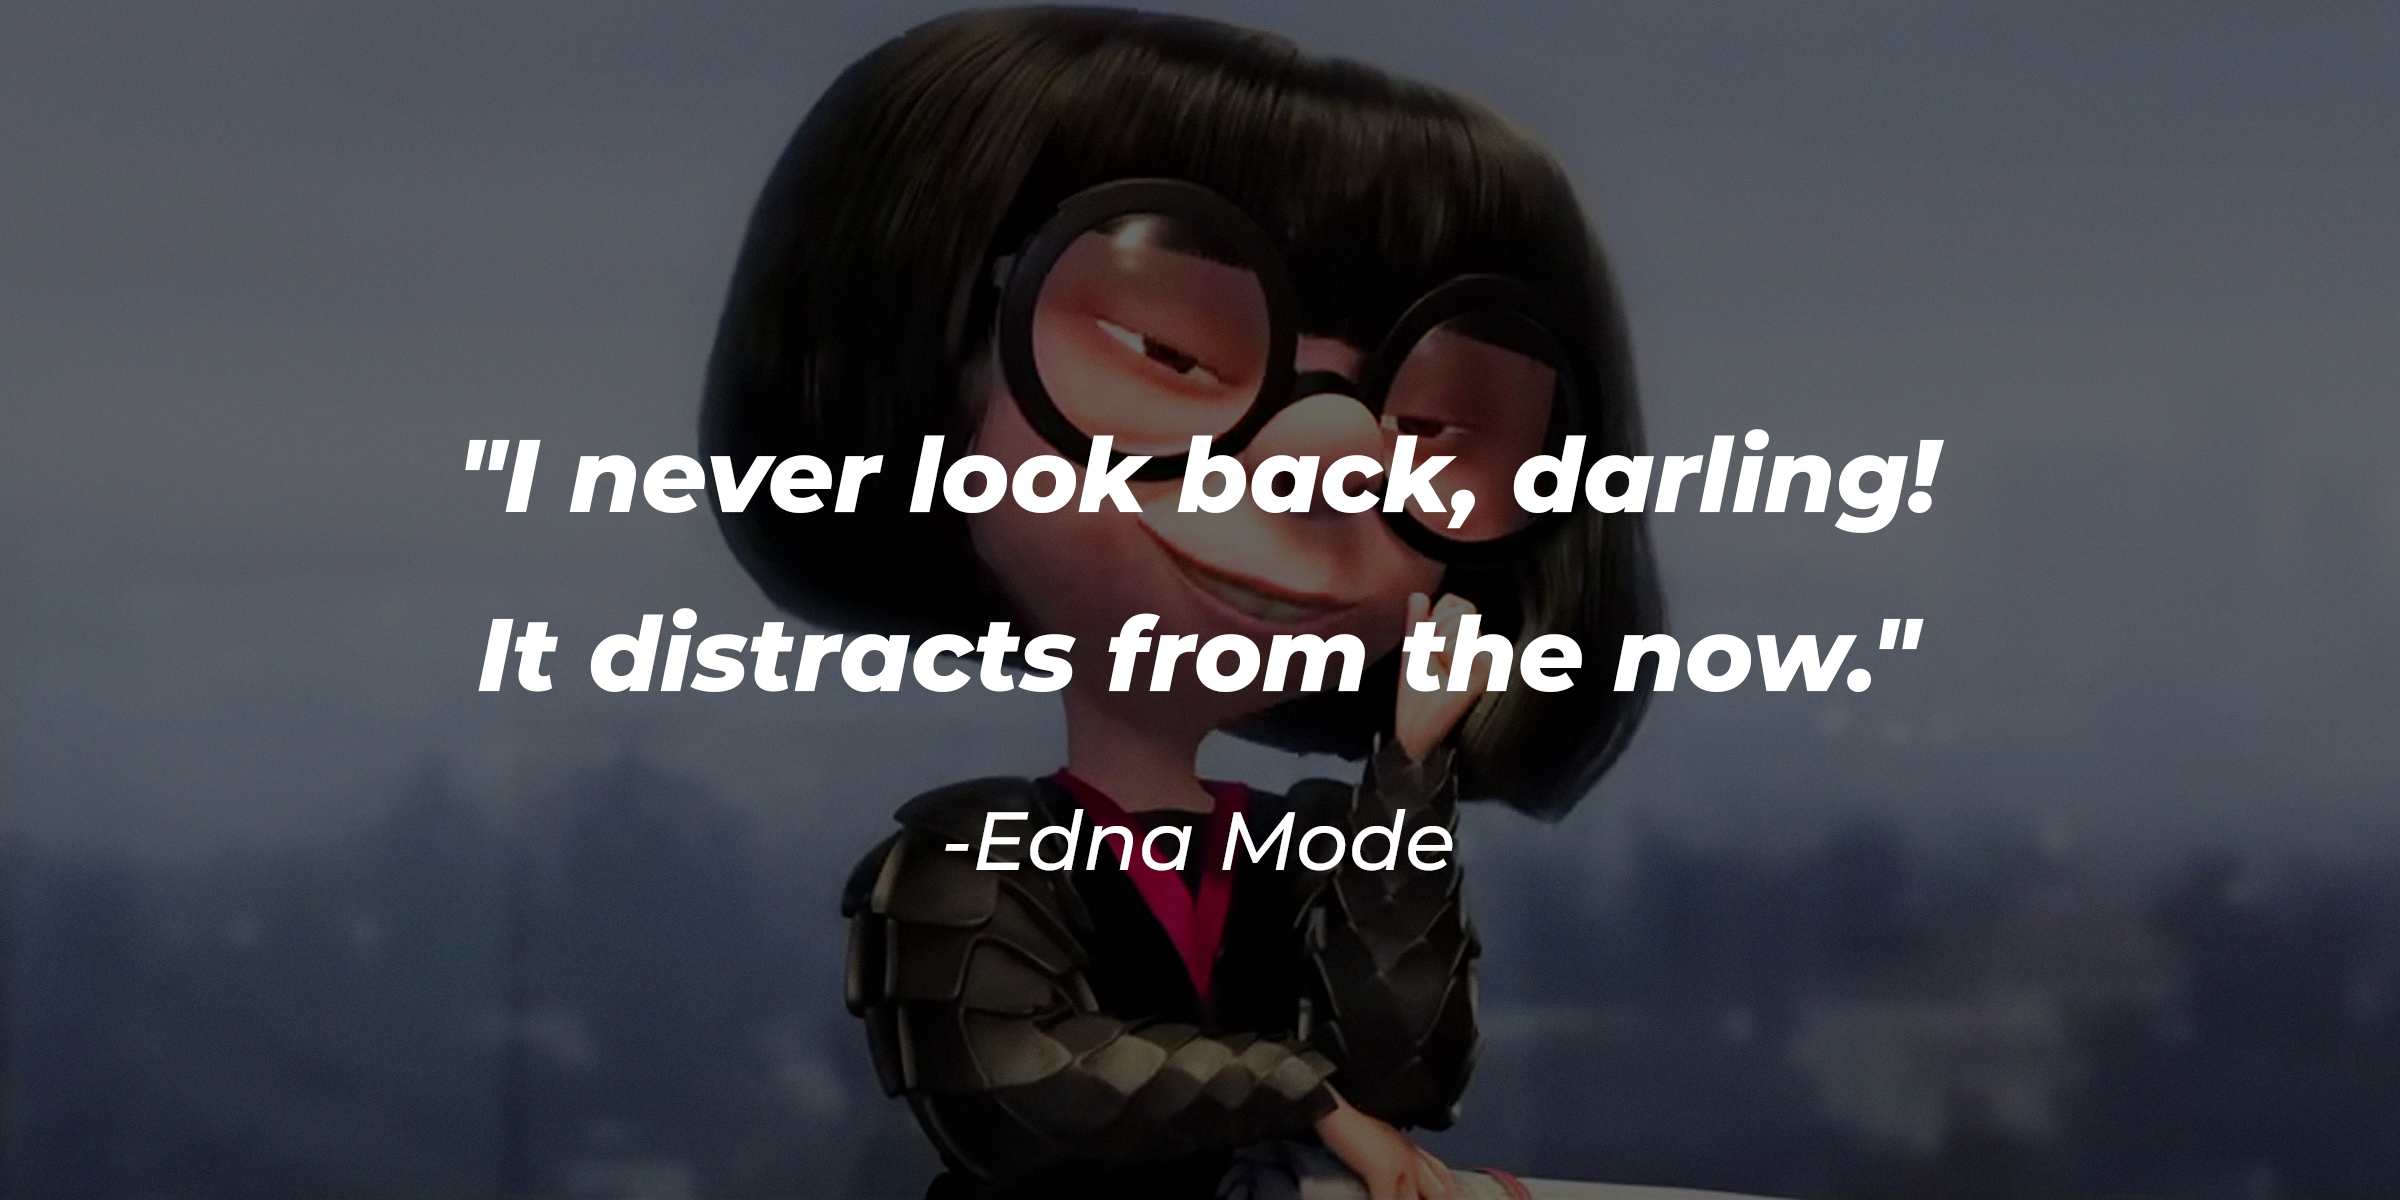 Edna Mode with her quote: "I never look back, darling! It distracts from the now." | Source: Youtube/Pixar